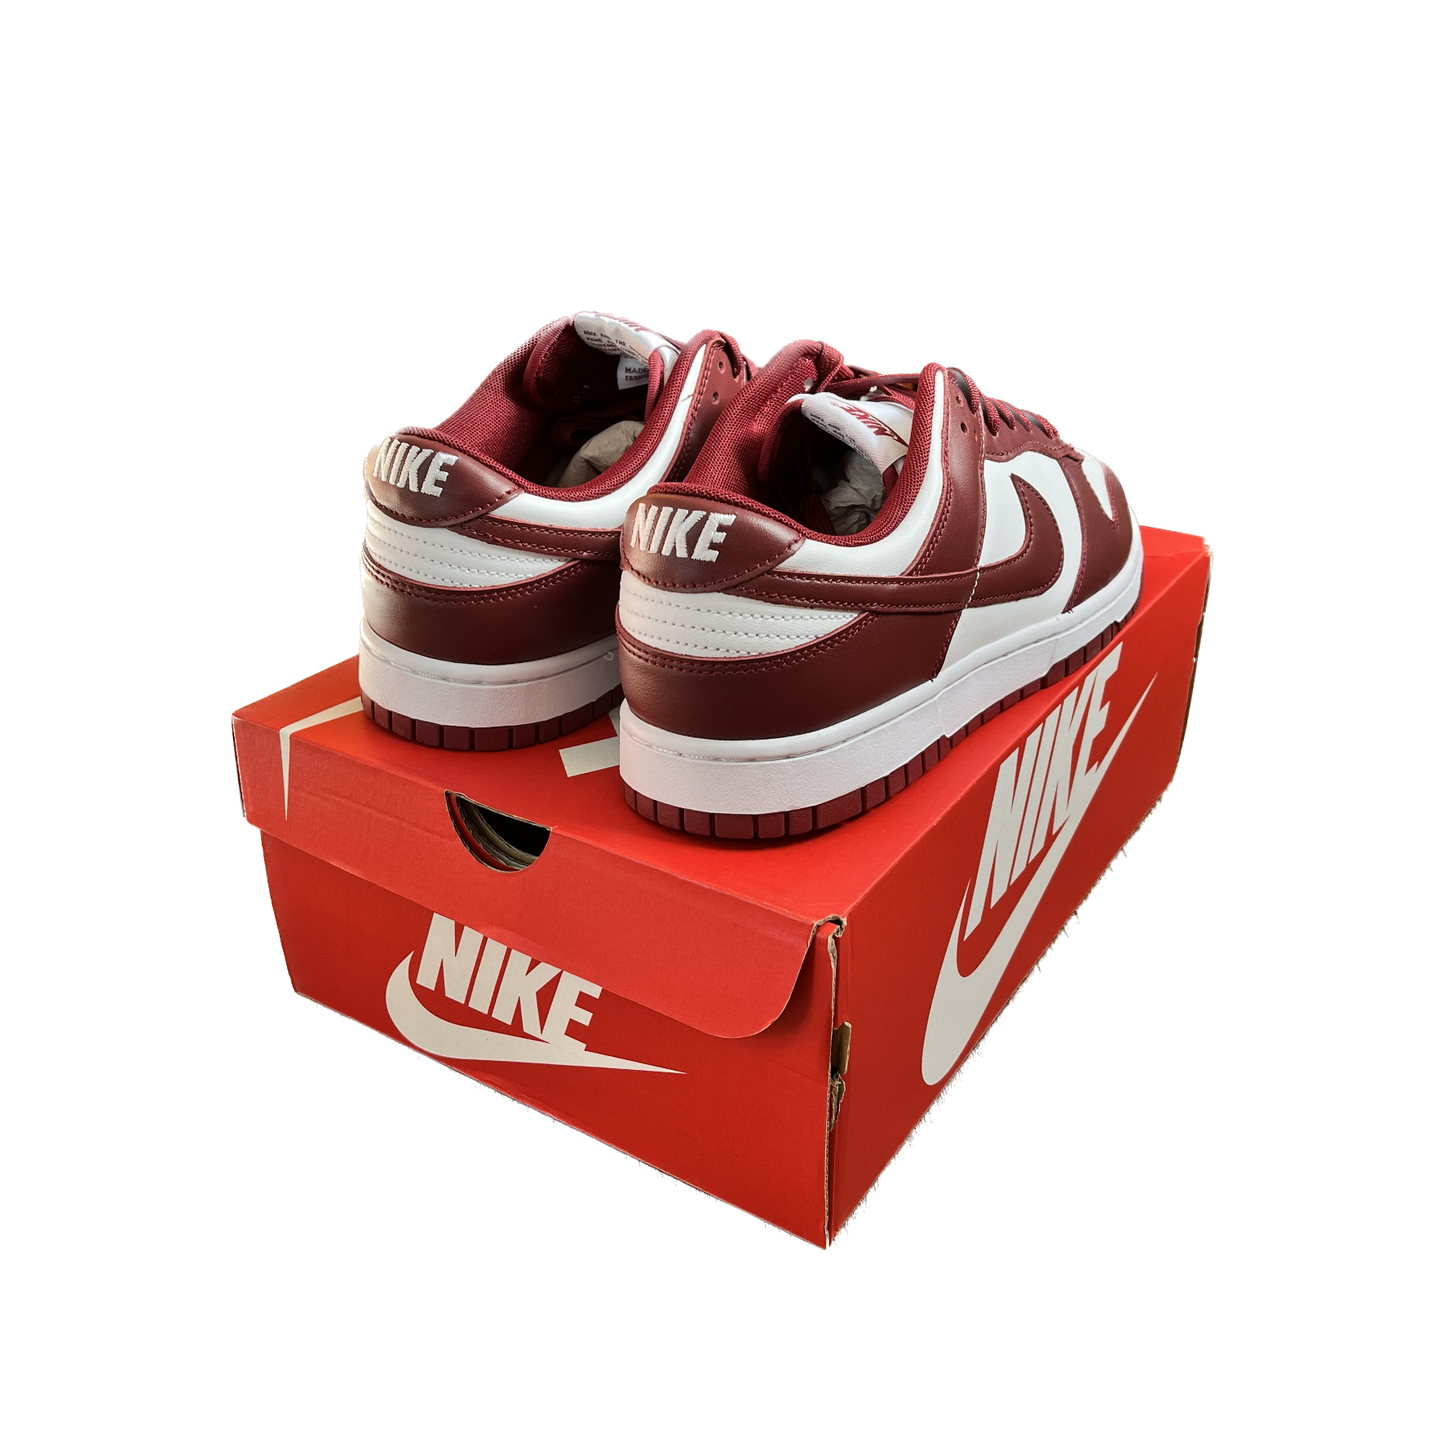 Nike Dunk Low Team Red - The Global Hype